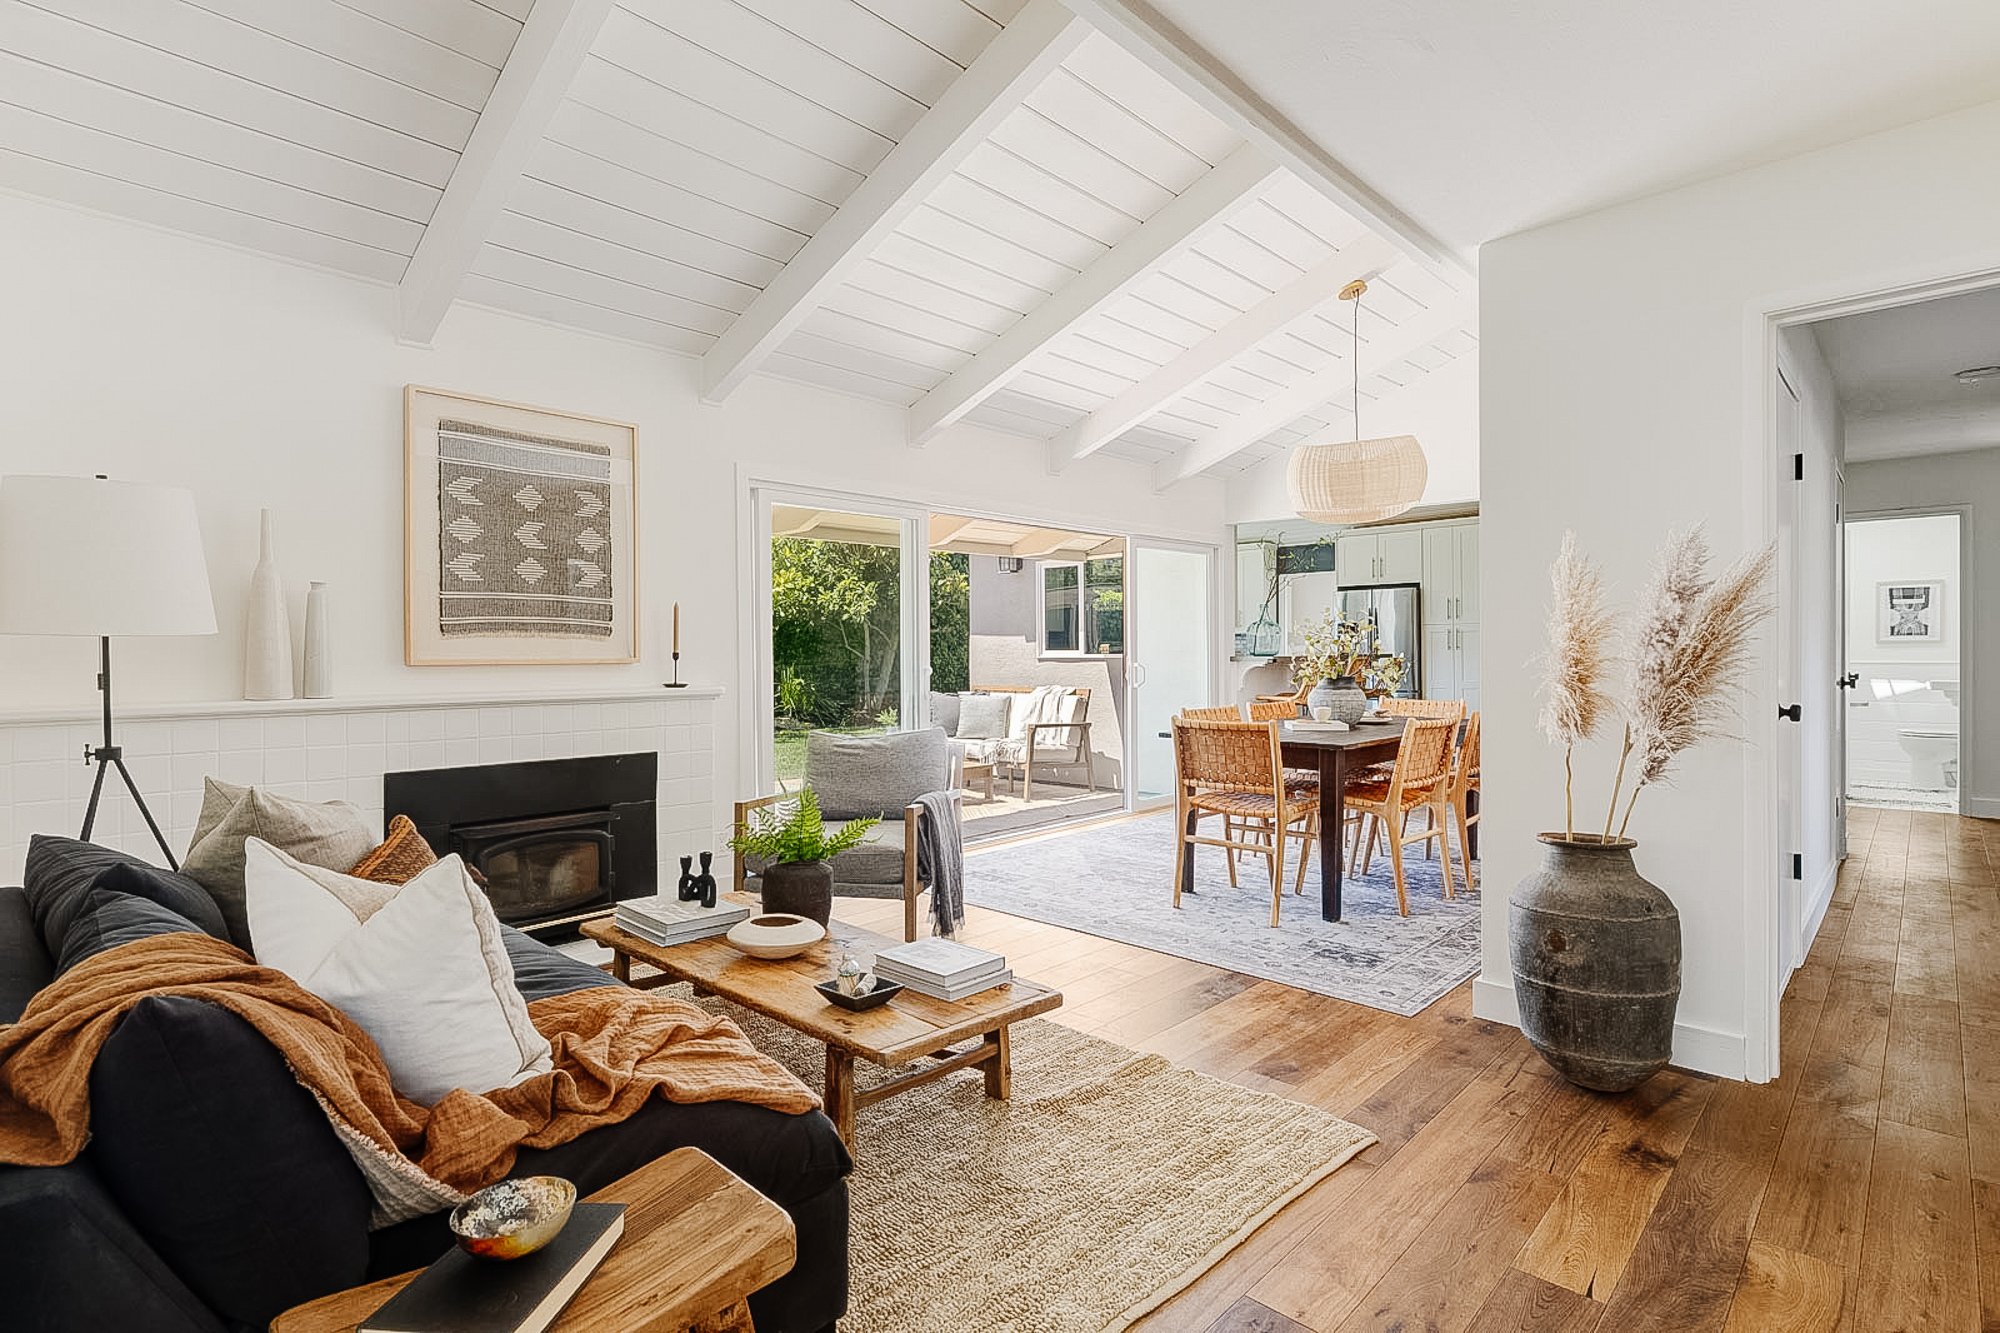 276 Flamingo Road, Mill Valley Listed by Own Marin #1 Real Estate Agents in Marin County-25.jpg